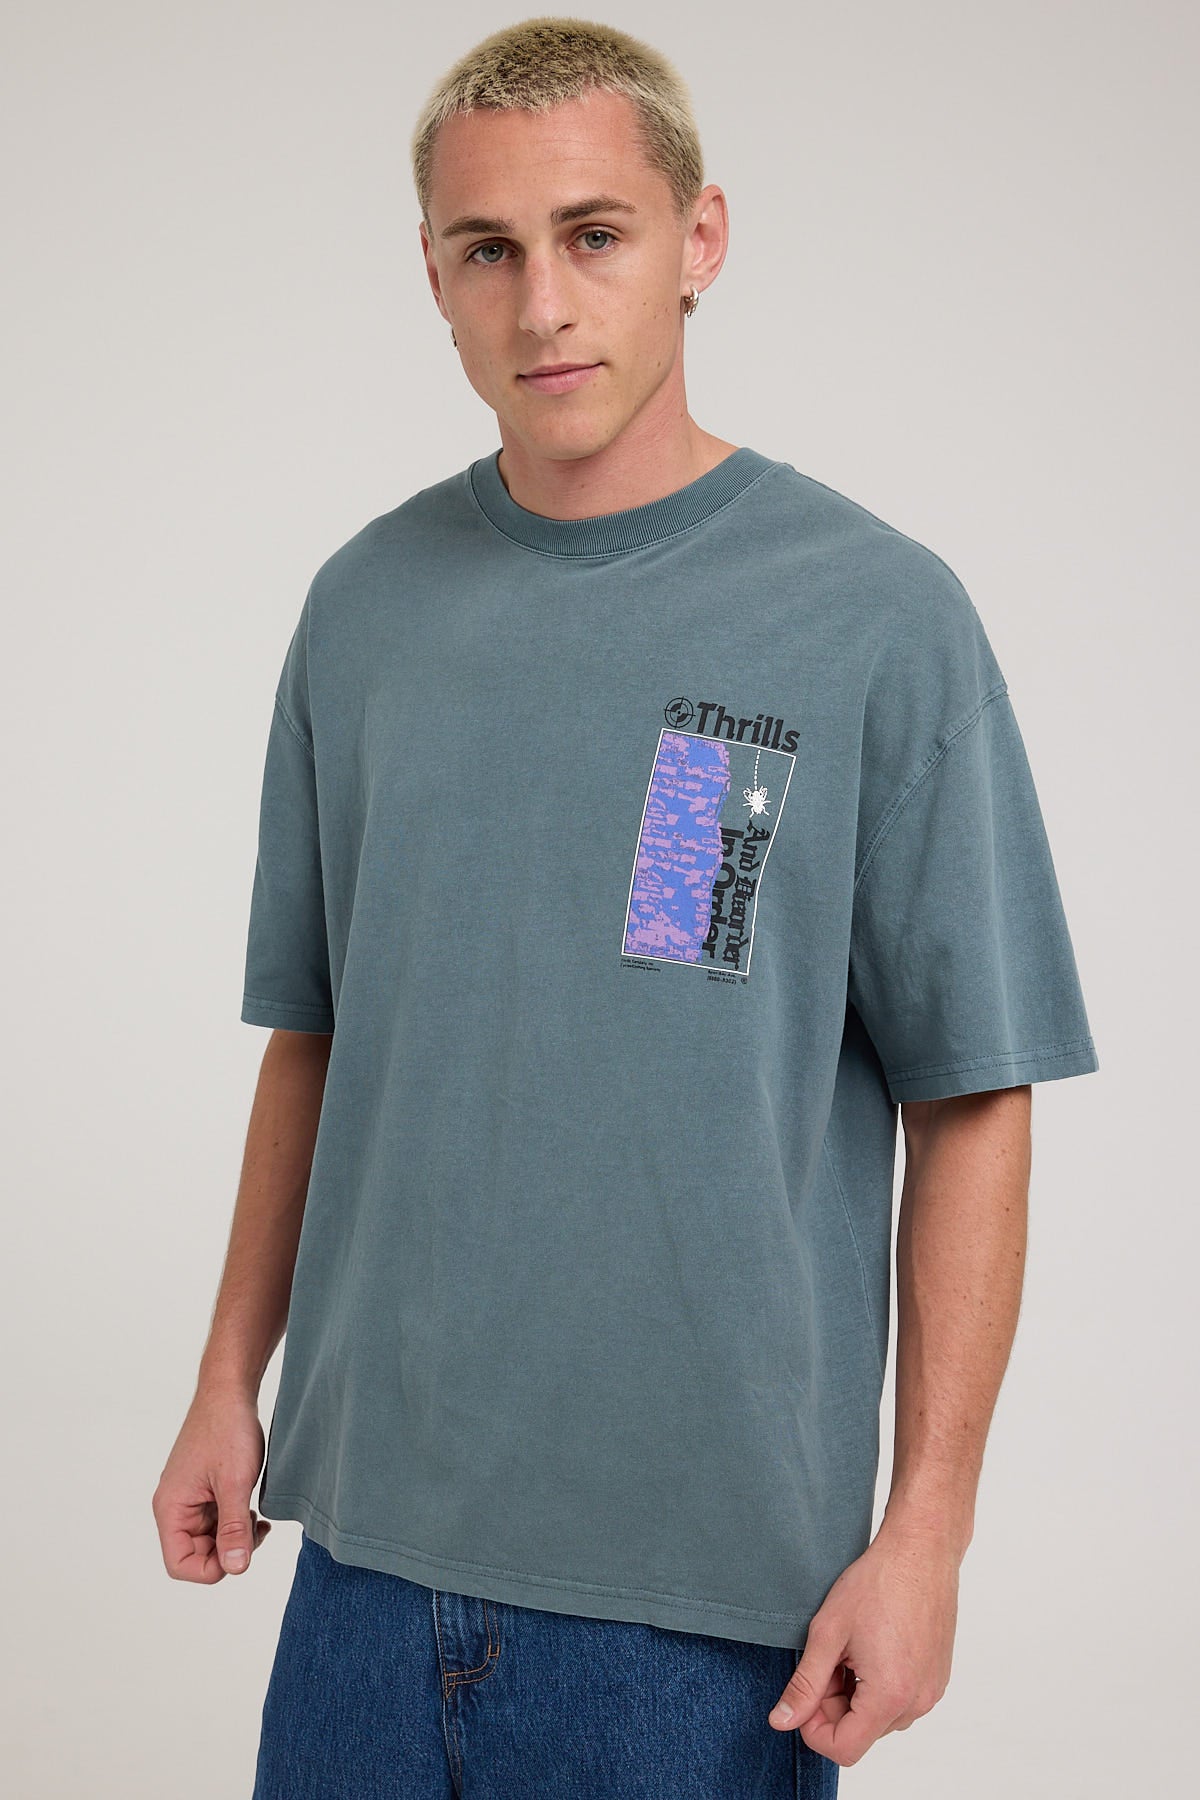 Thrills In Order Box Fit Oversize Tee Stormy Sea